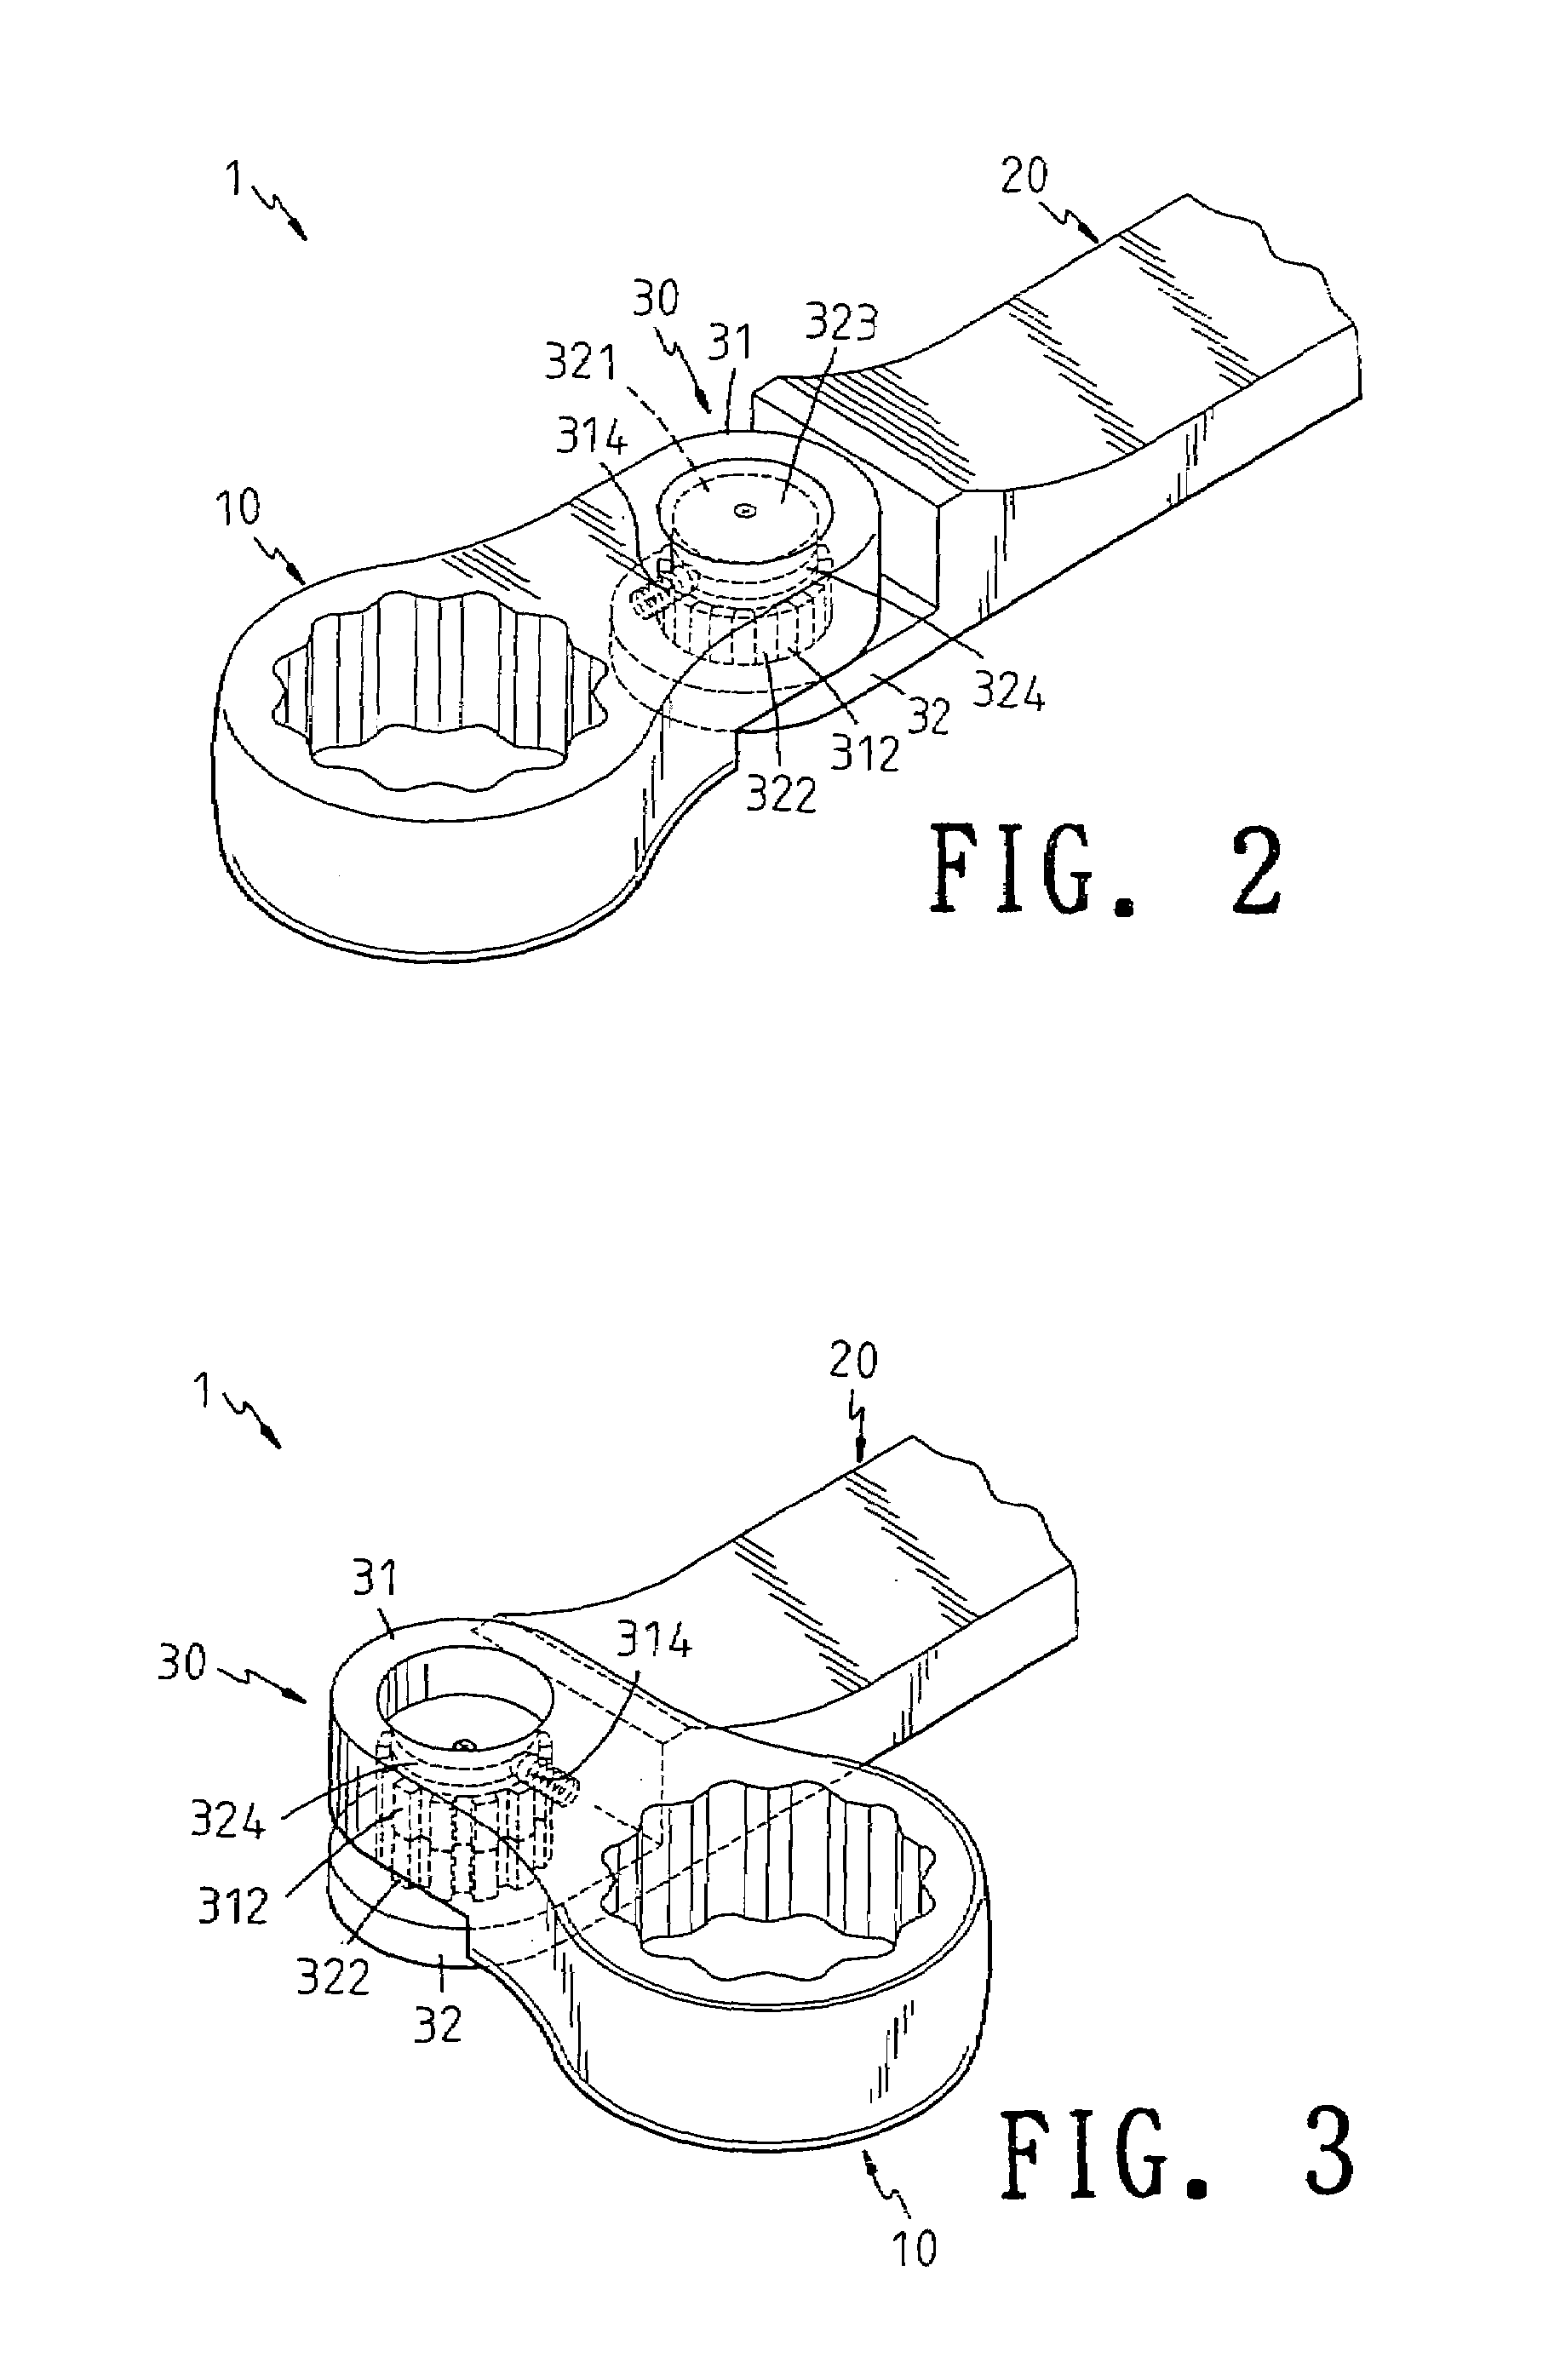 Pivoting assembly of a hand tool